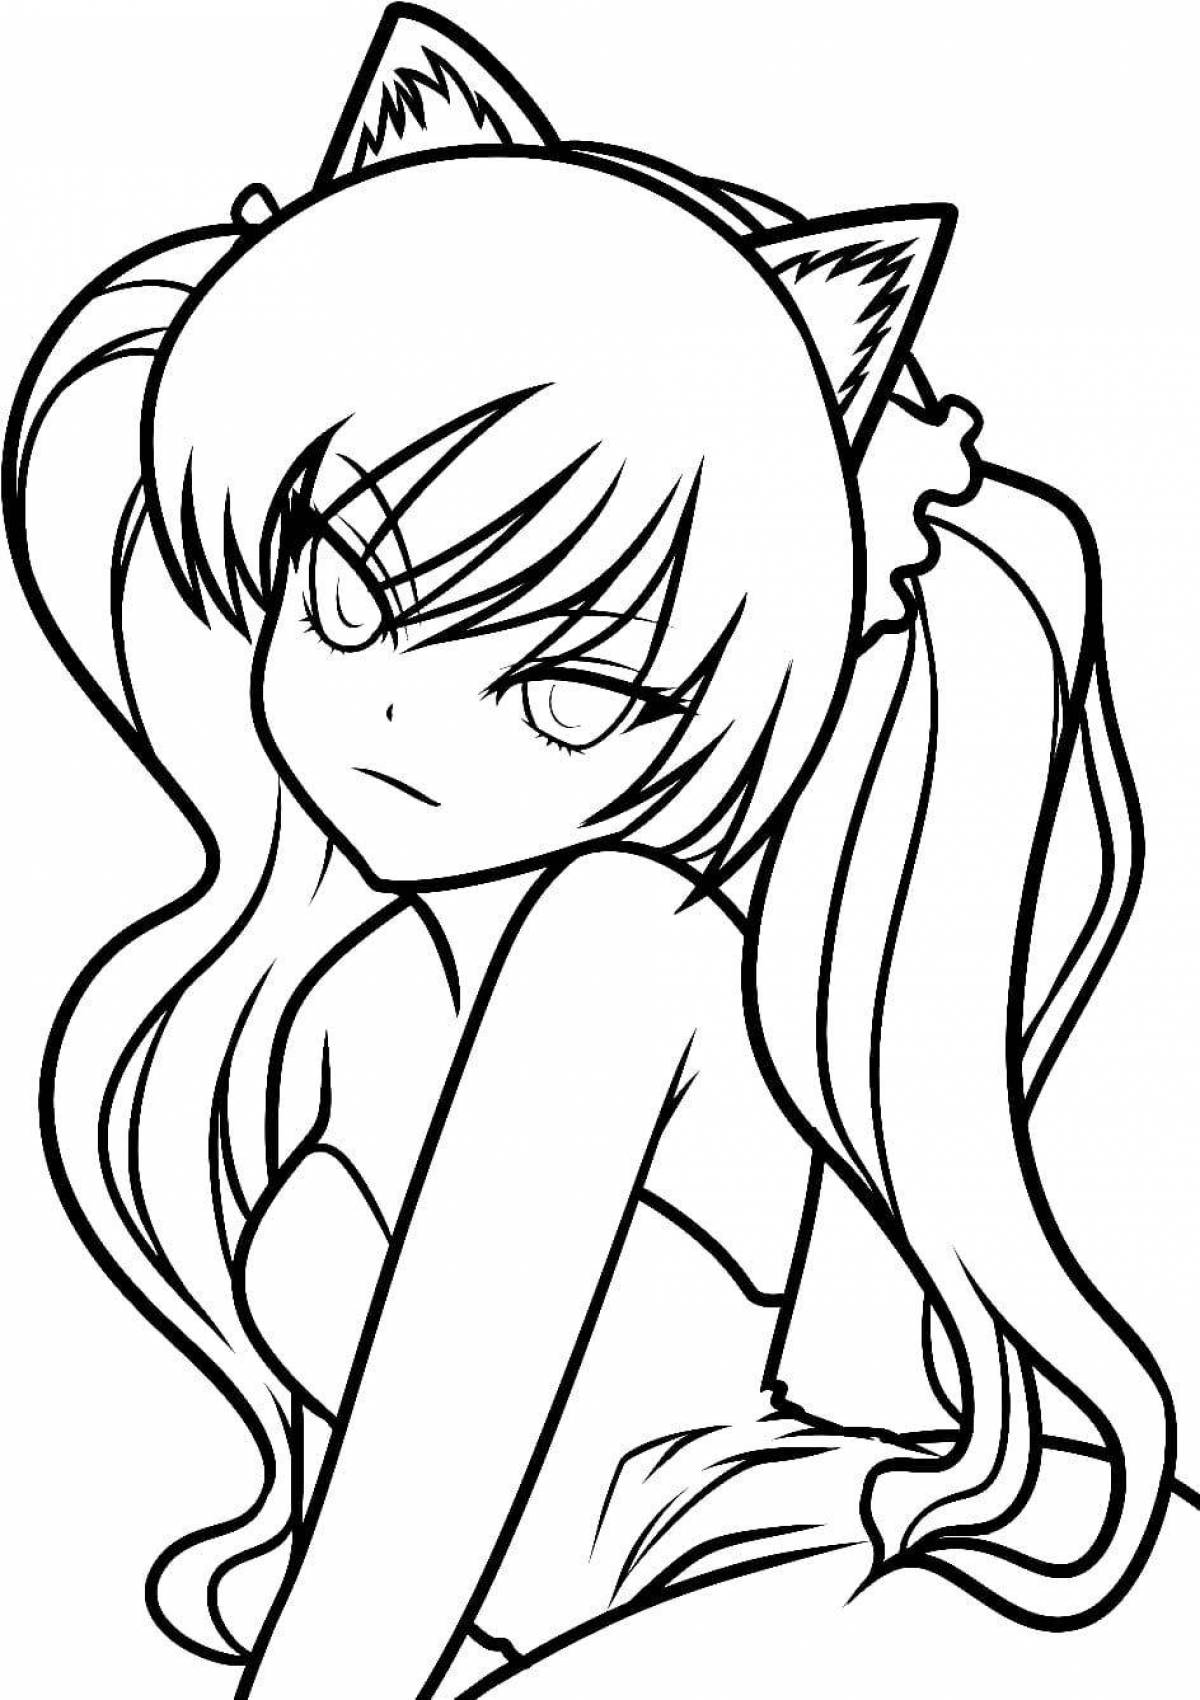 Colorful anime cat coloring page